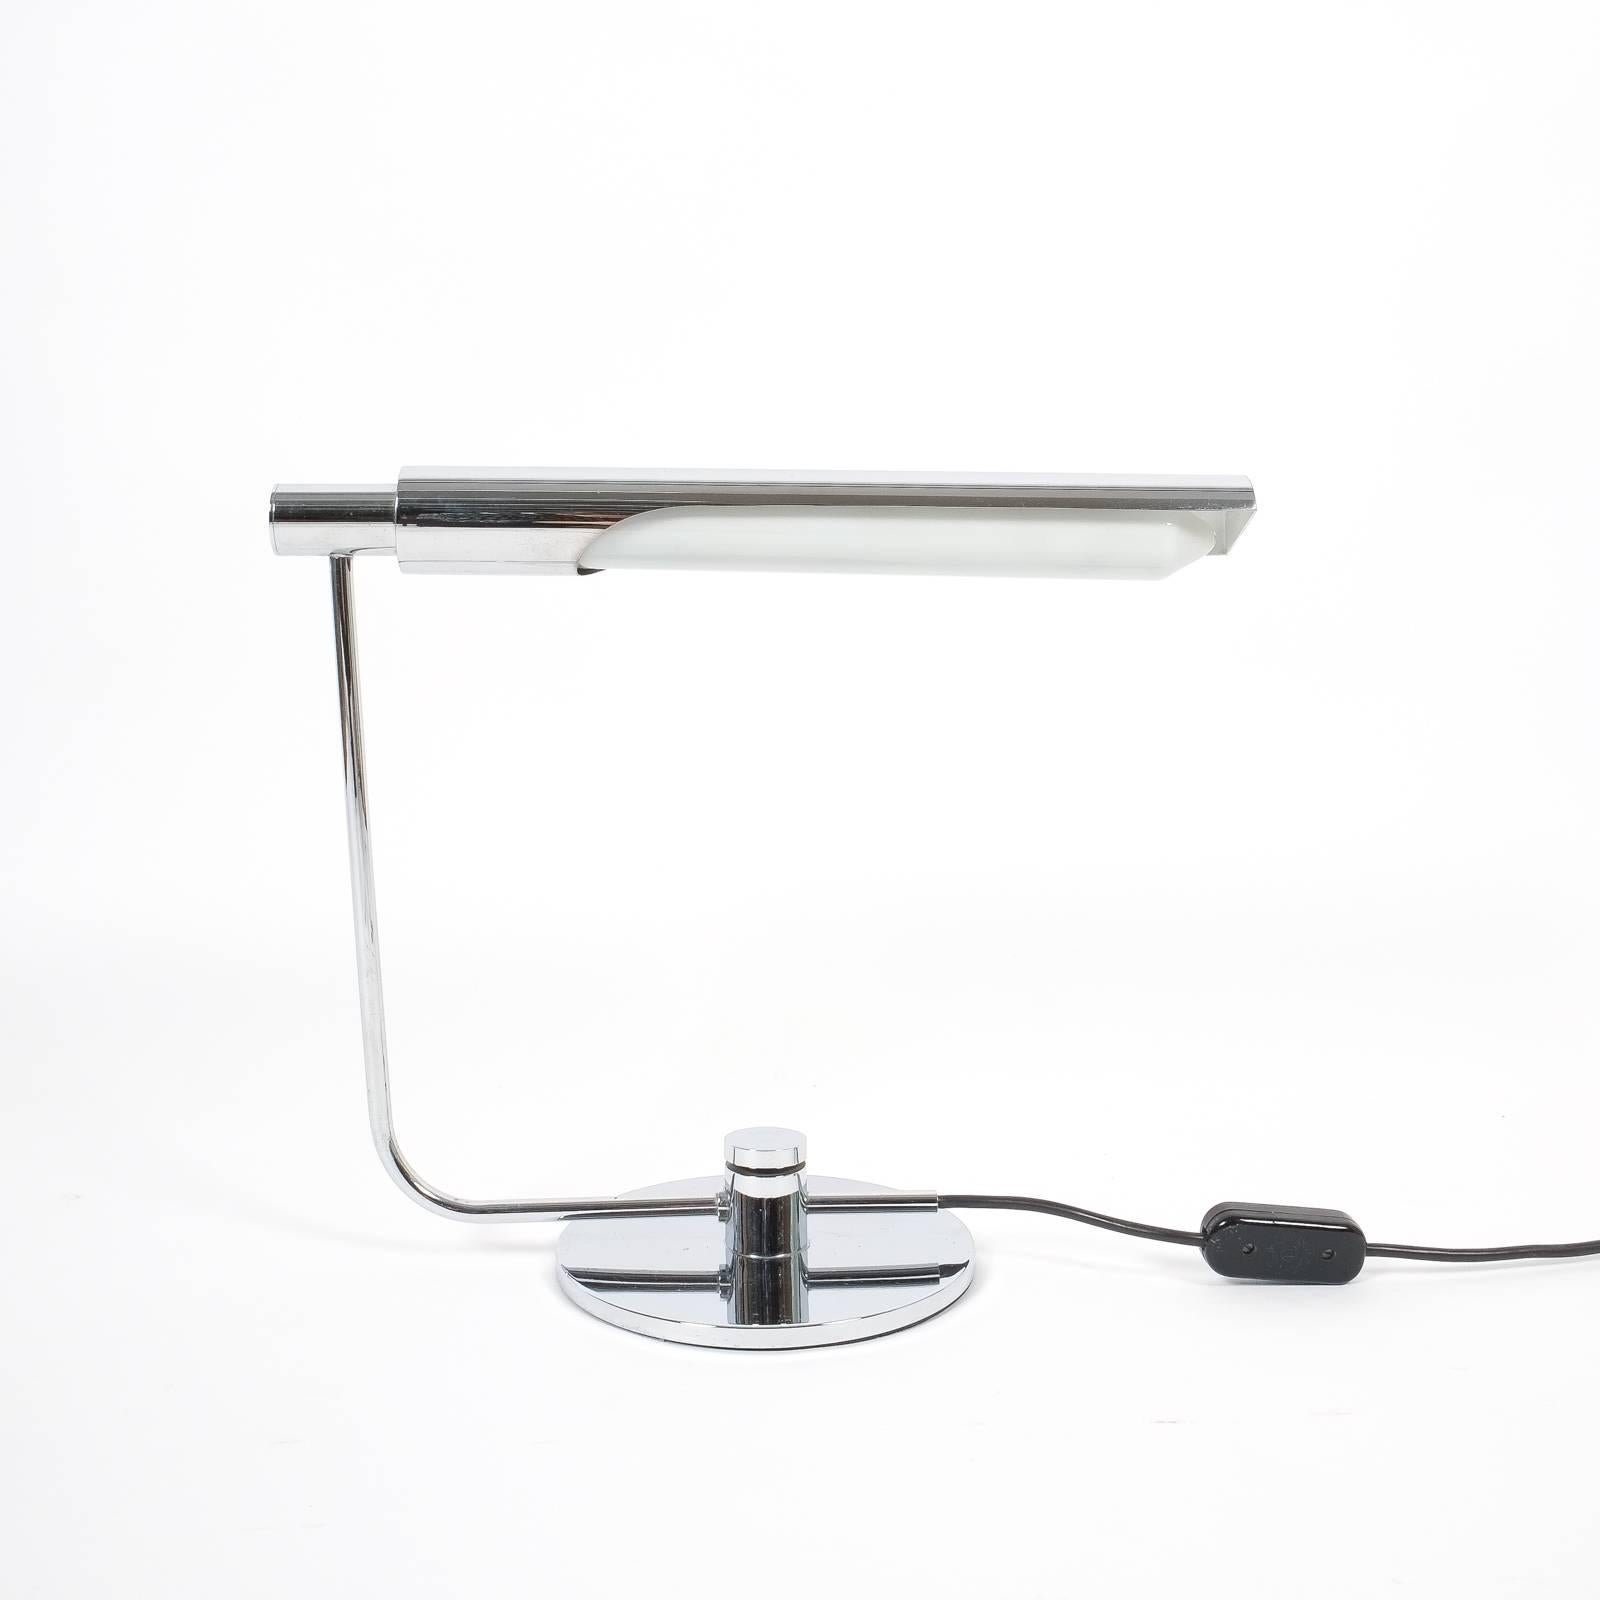 Elegant chrome desk lamp attributed to the Swiss designers Rosemarie and Rico Baltensweiler. It can easily be adjusted in height and is in very good condition with electricals in original condition. Please scroll down to find all of our items using